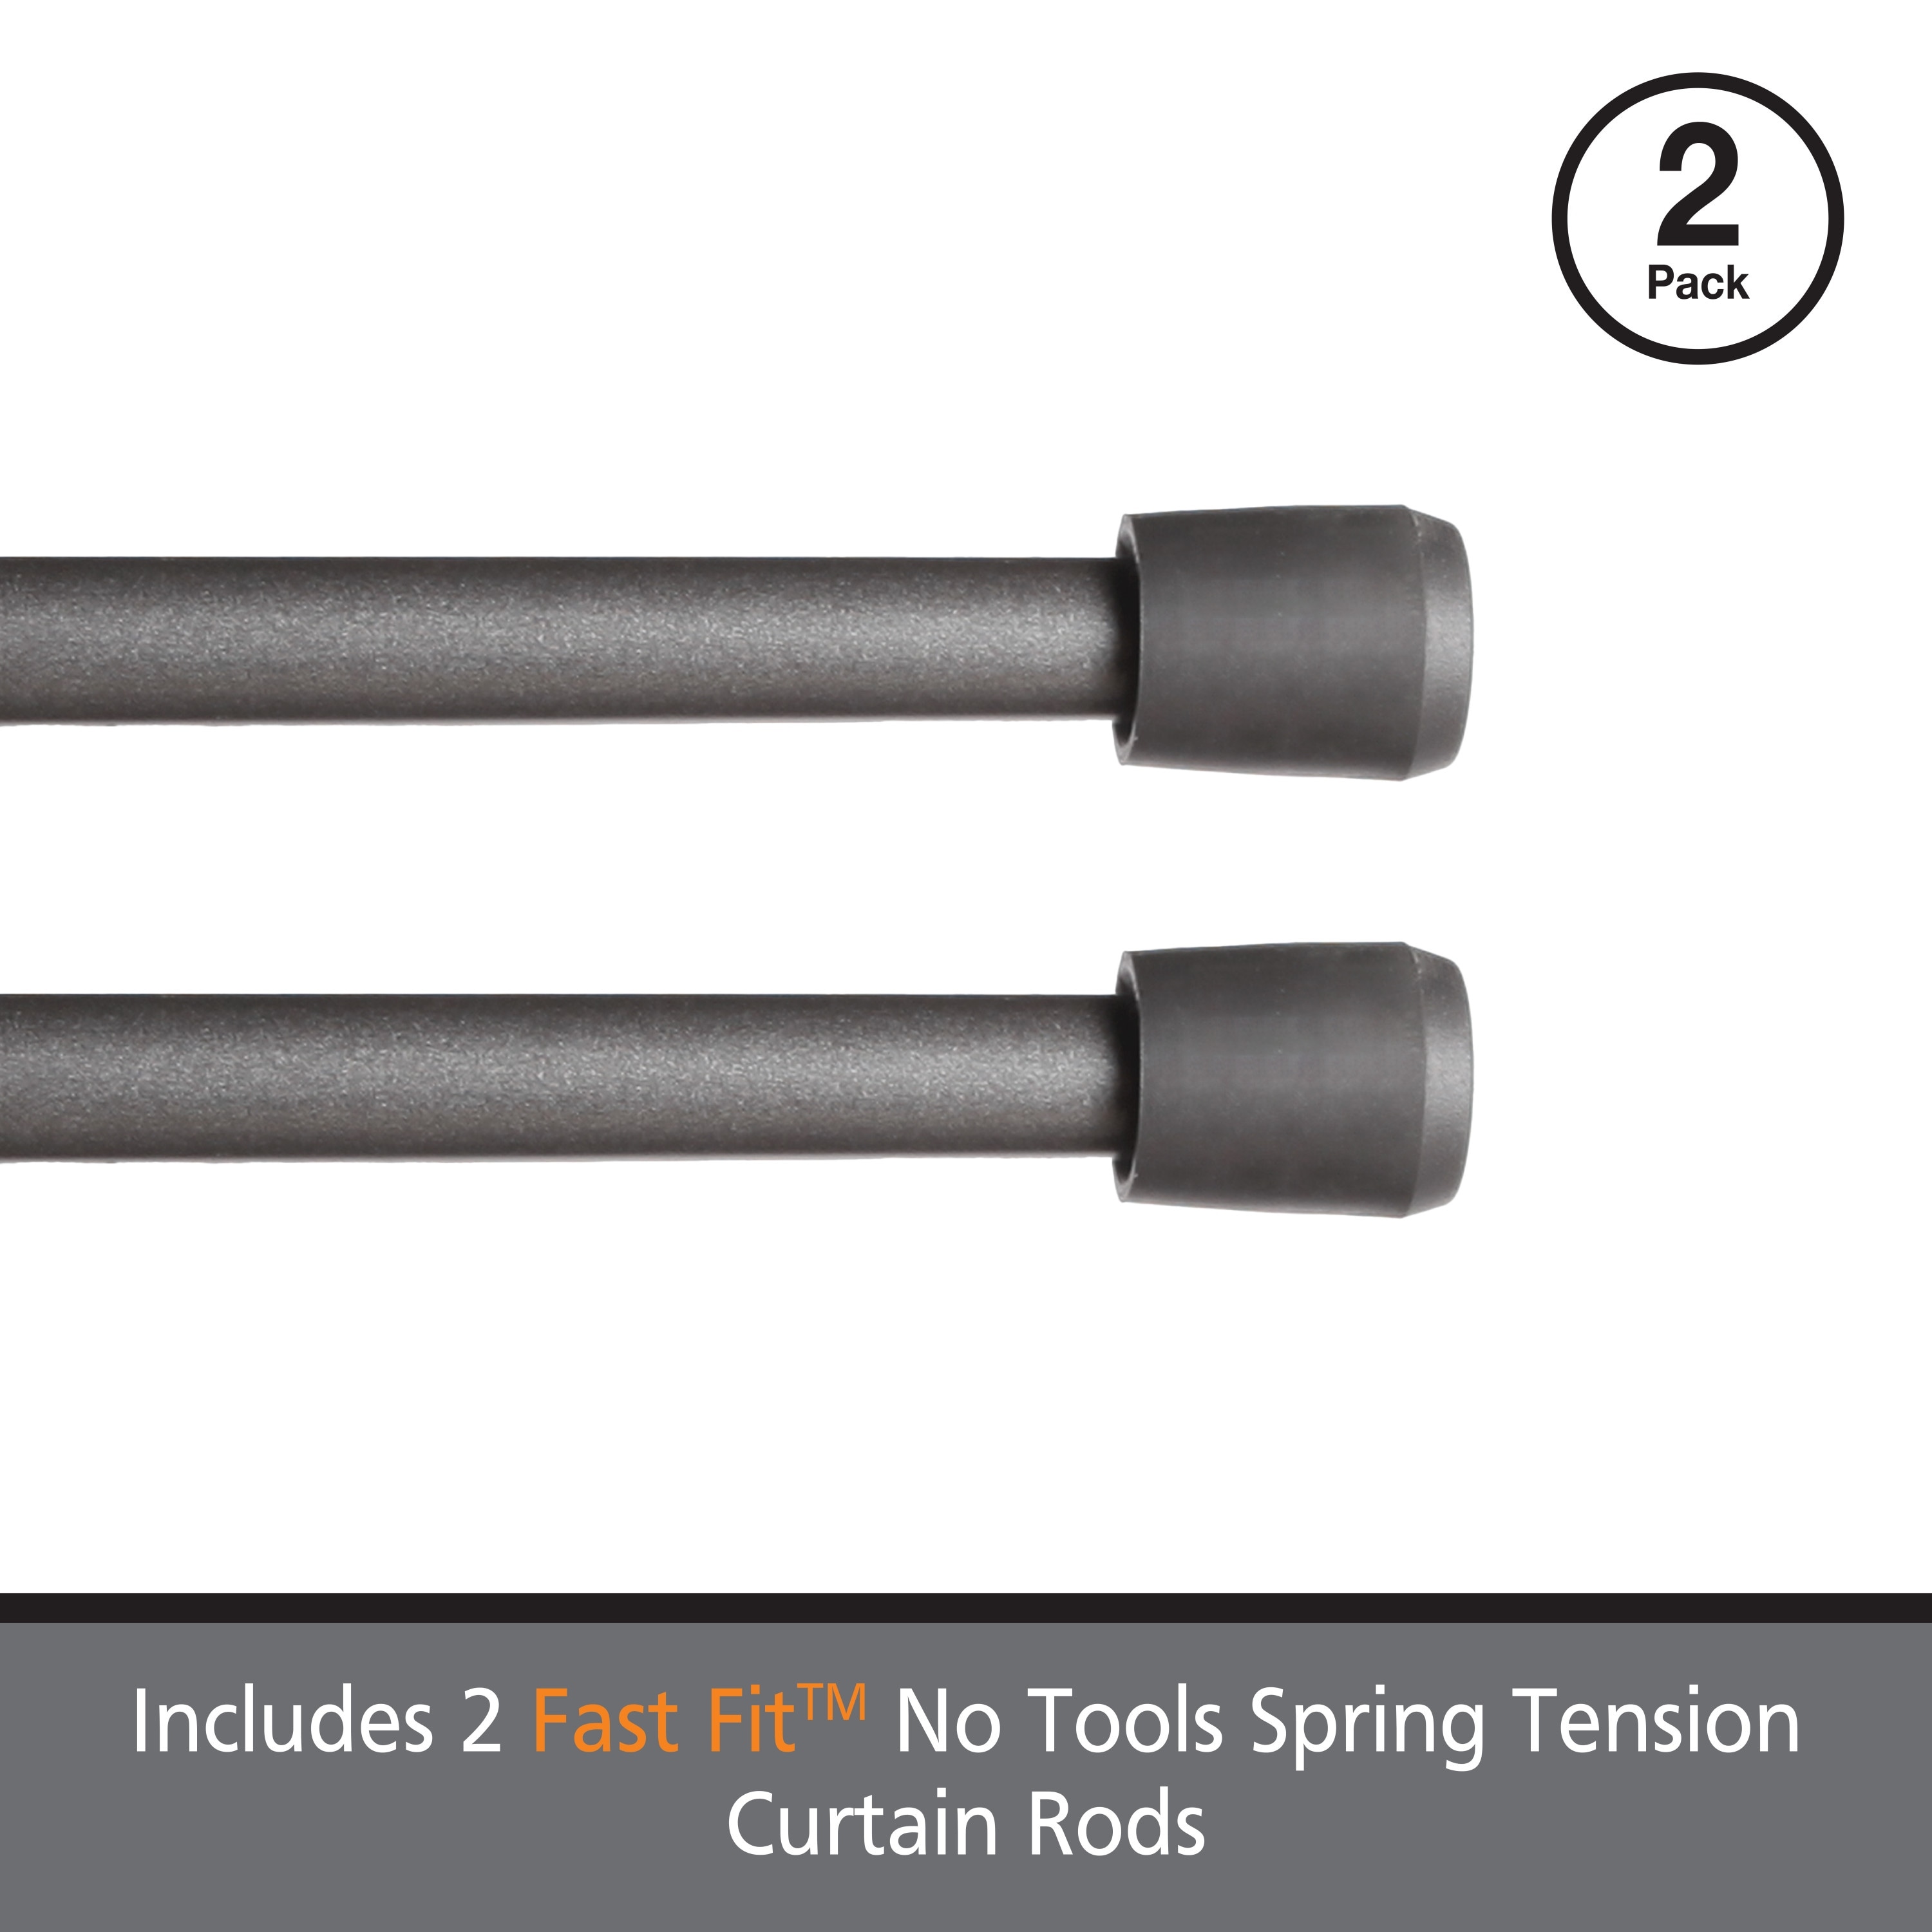 Kenney Fast Fit No Tools 7/16 Spring Tension Rod, 2-Pack - On